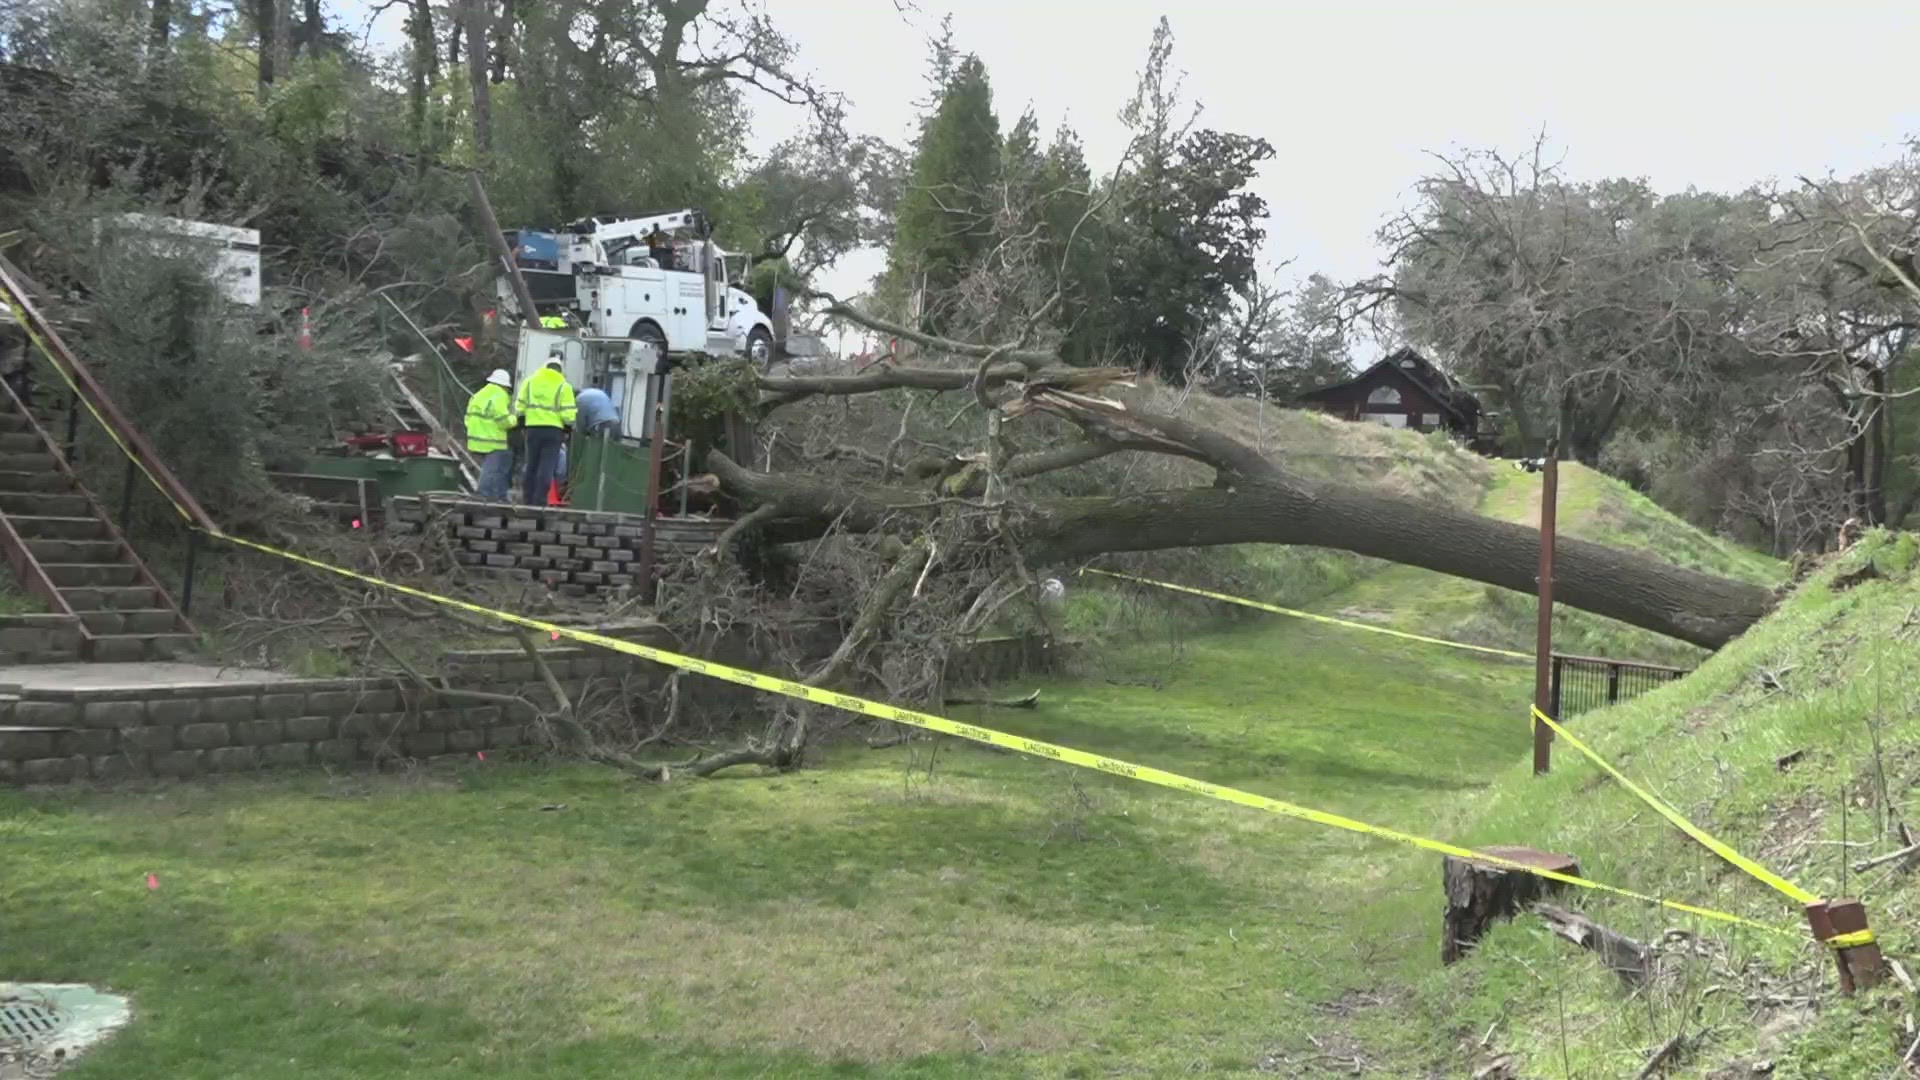 The tree was knocked over by wet soil and harsh gusts of wind as another storm hit Northern California Friday.